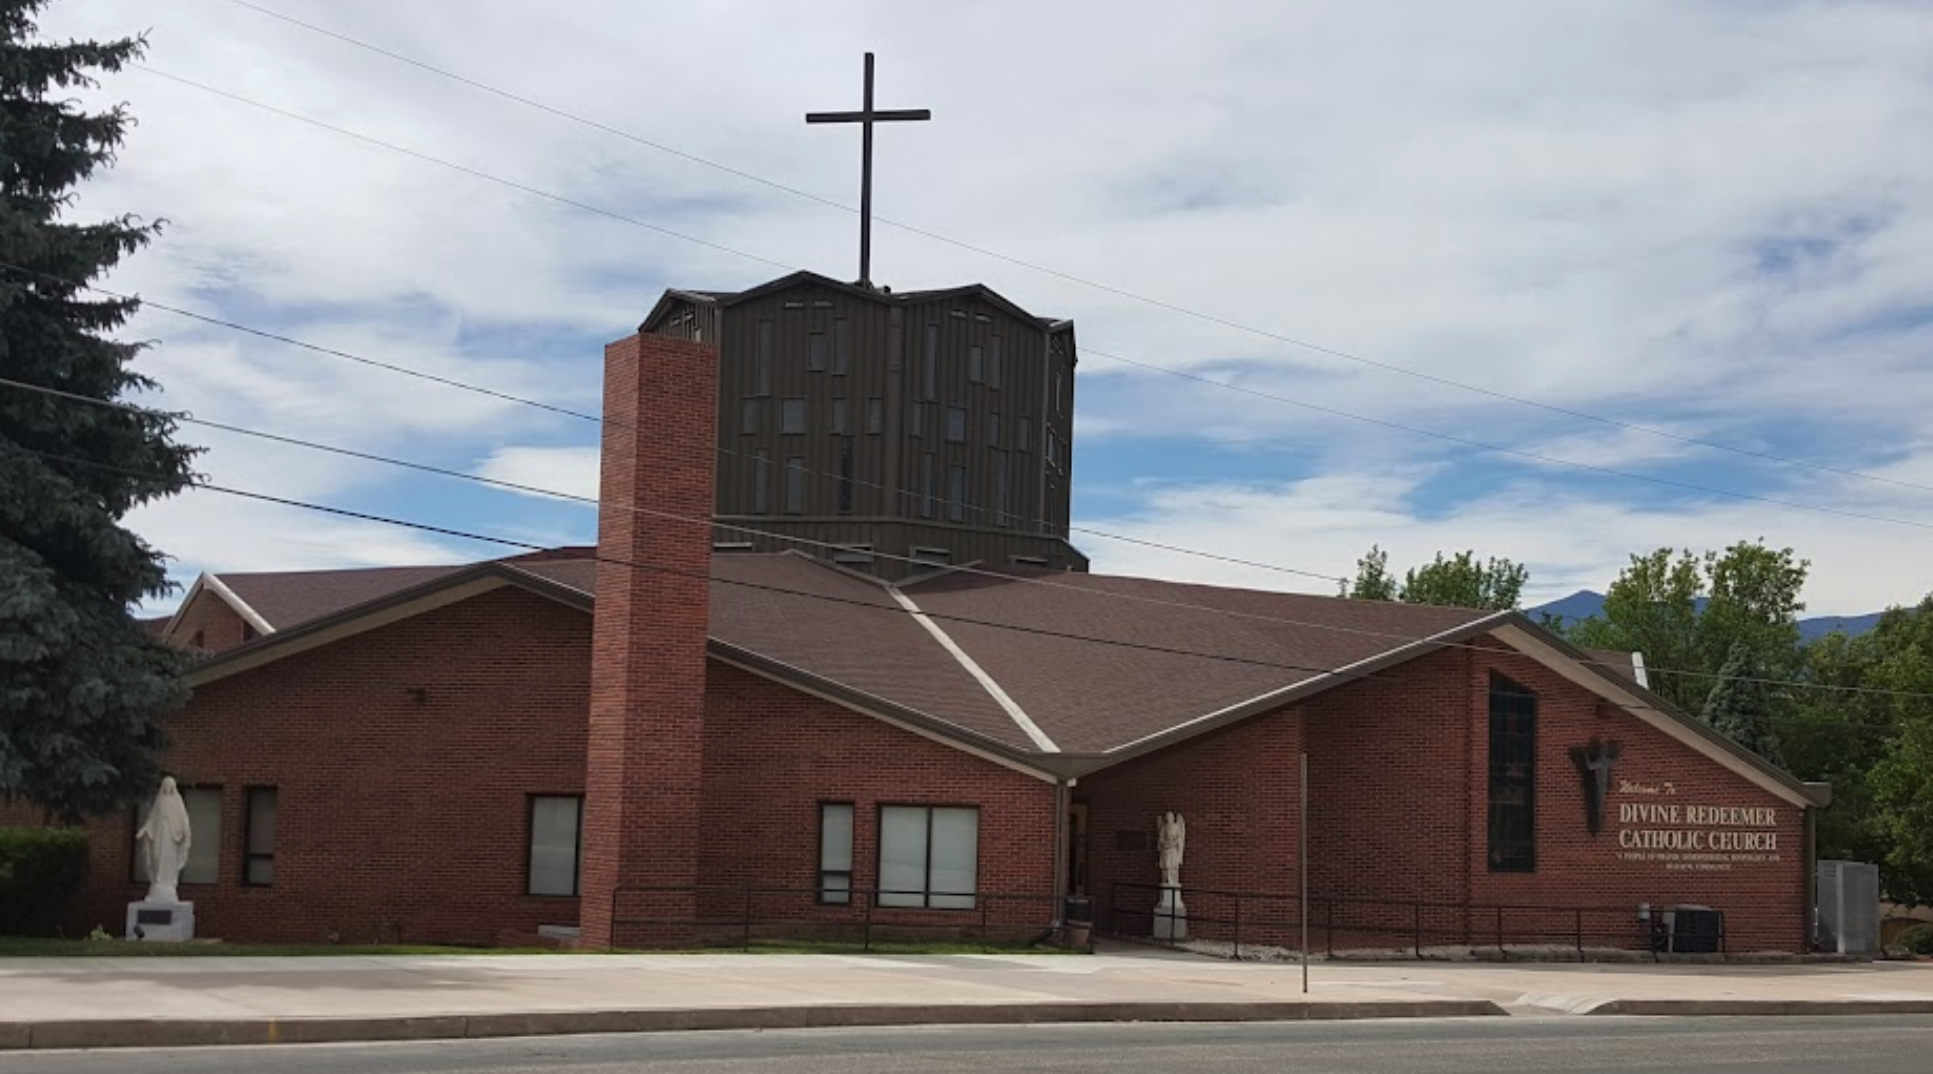 Outside view of Divine Redeemer Catholic Church